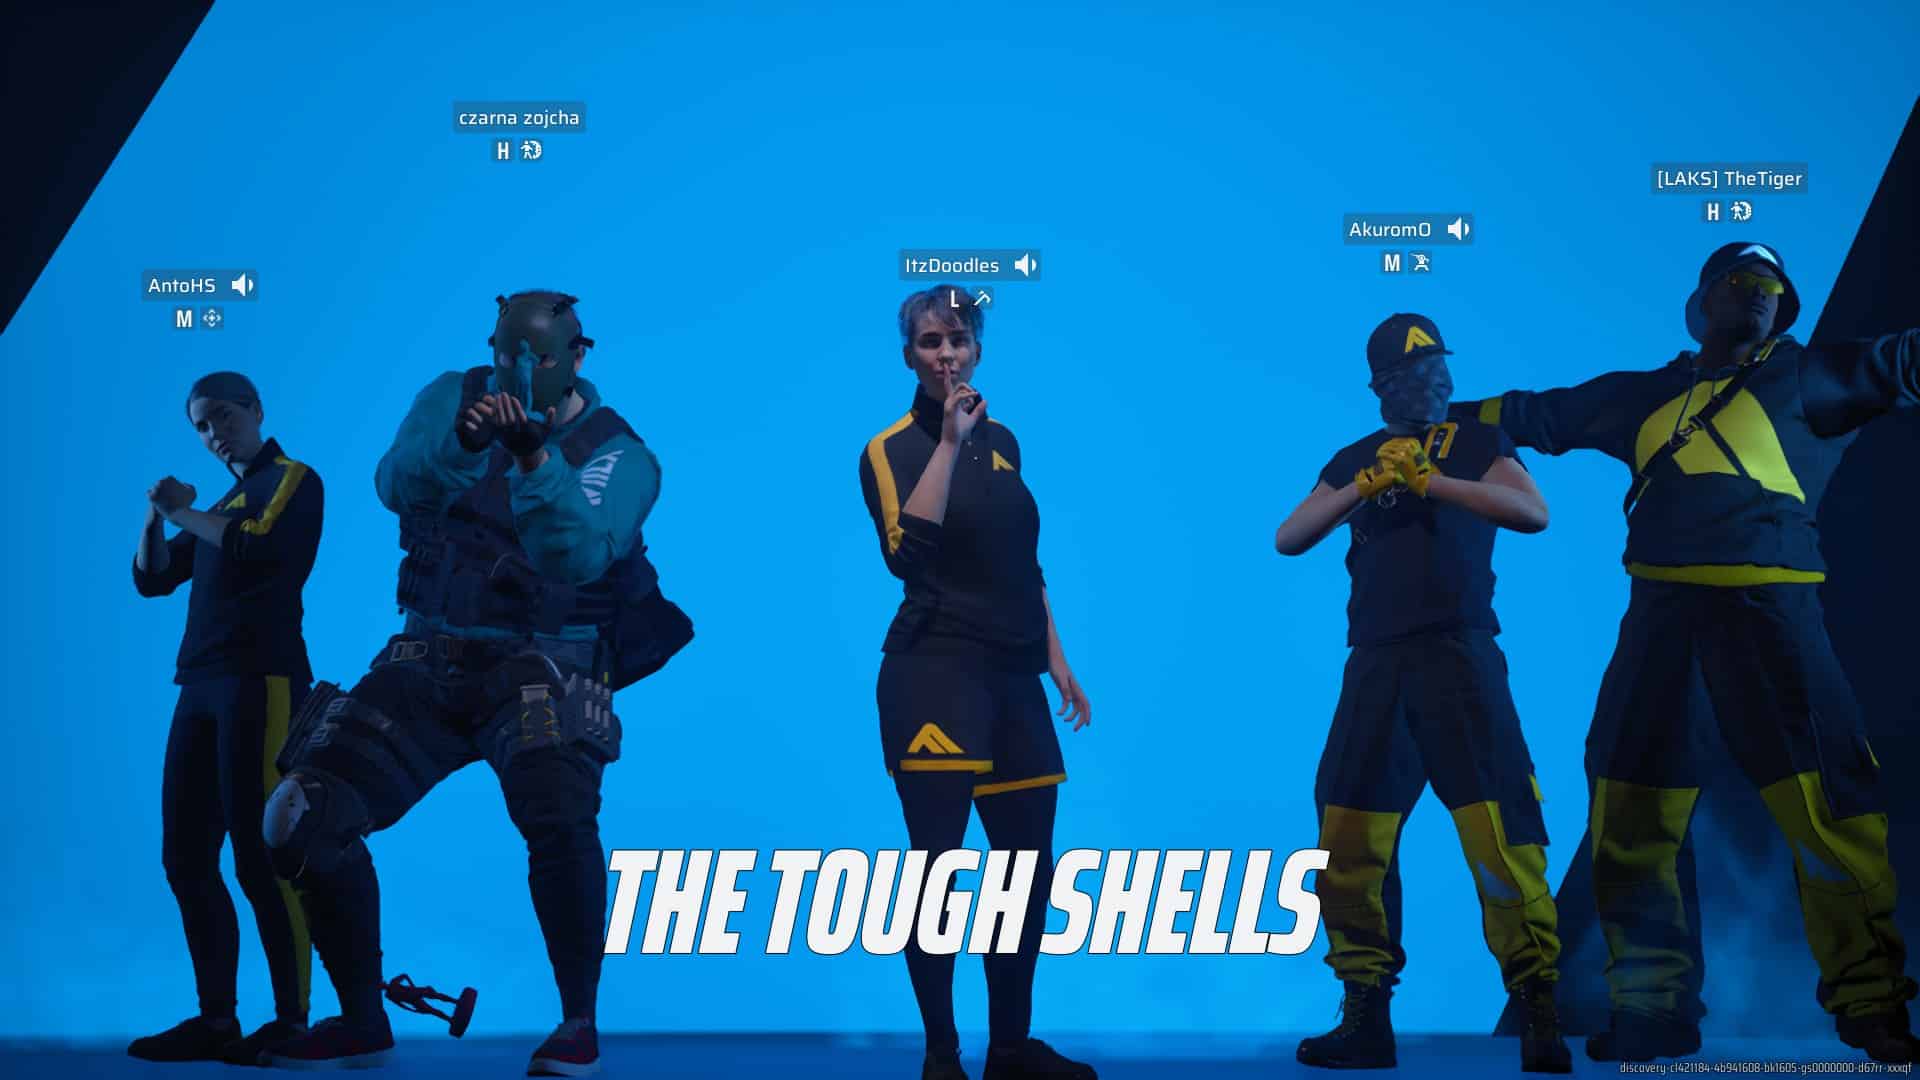 A group of video game characters in coordinating outfits posing under the title "The Finals: The Tough Shells.